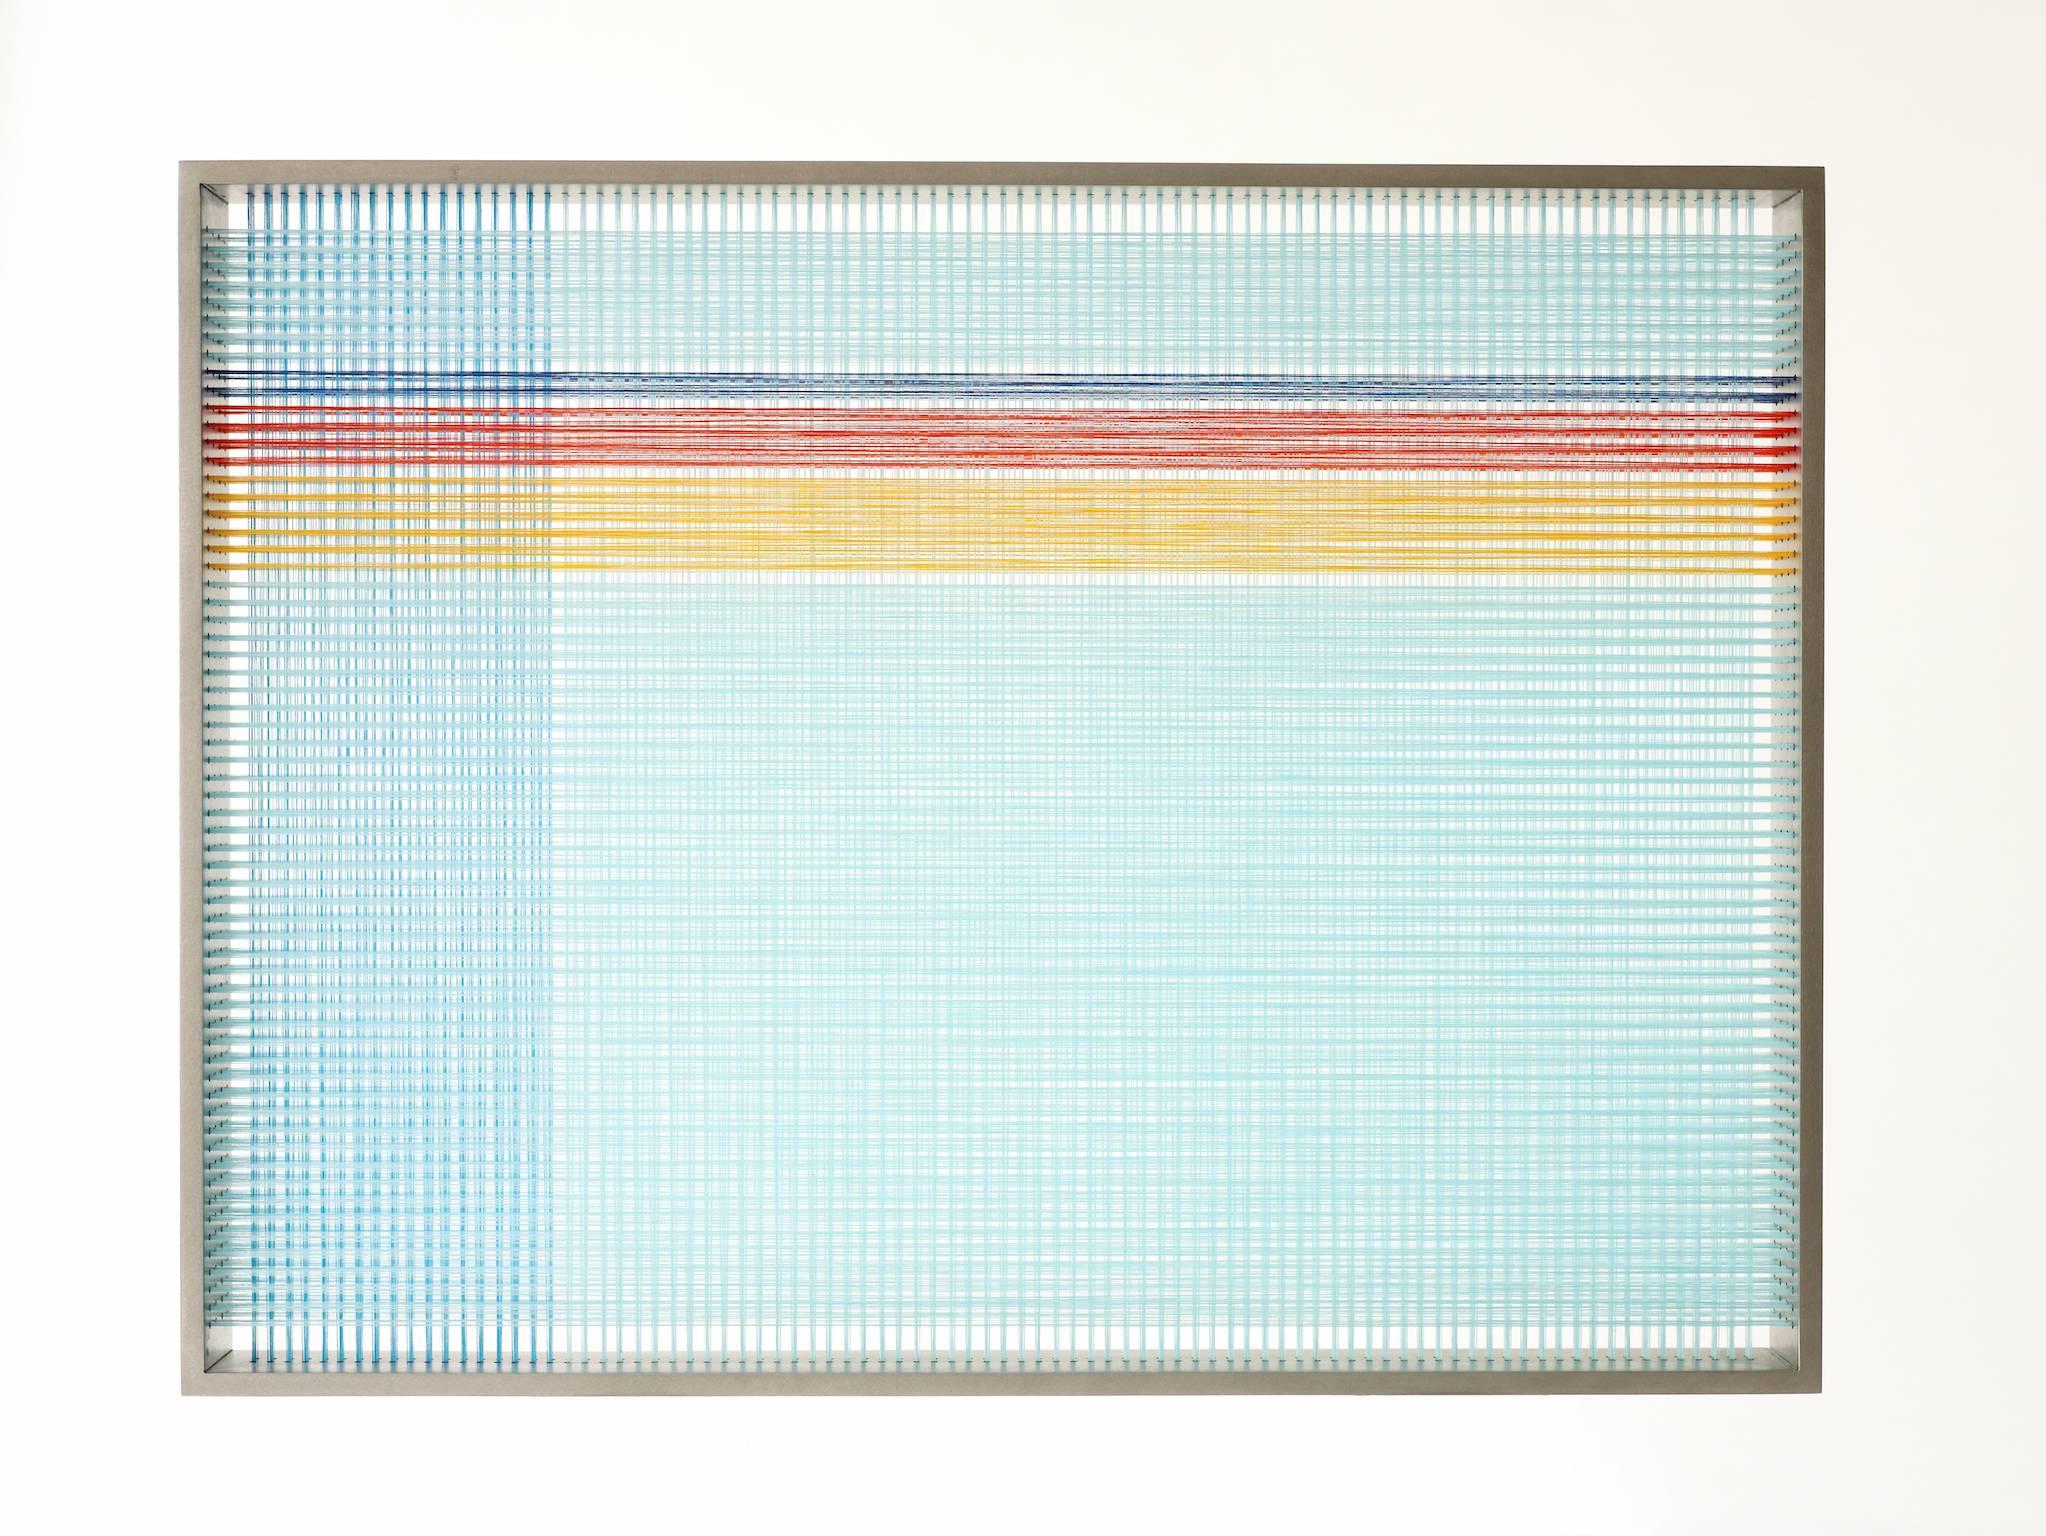 Unique woven panel by Panama-based American artist Christopher Broyles, b. 1979.

Broyles’s process is intensive and fastidious and his work is evocative of that rigor in its examination of the interrelationship of color, line and plane. This